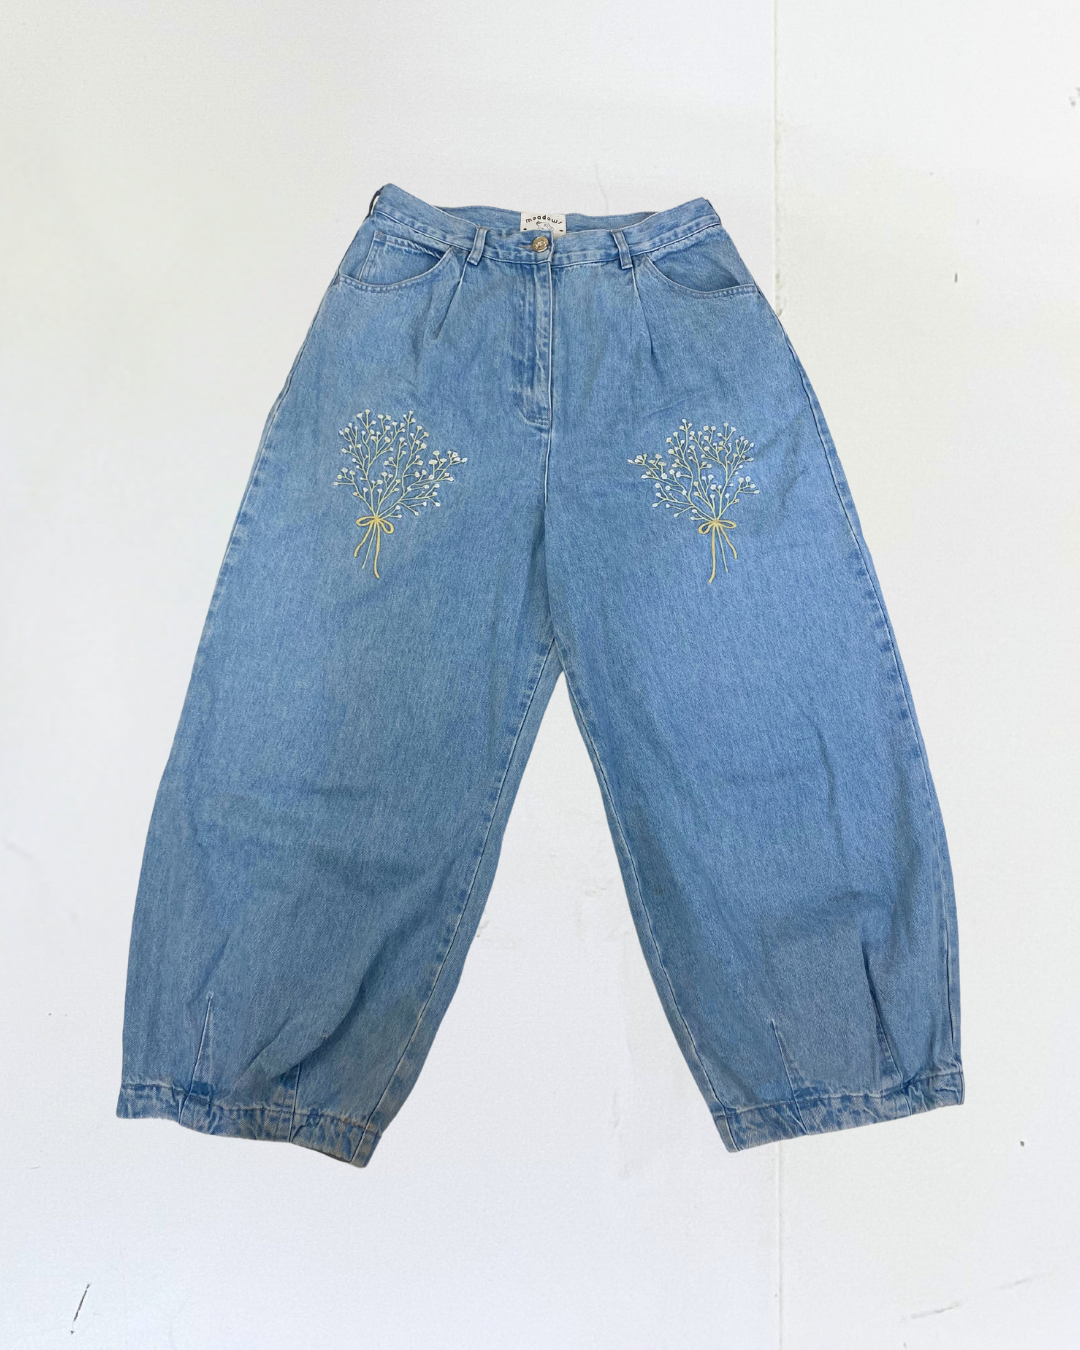 Meadows Embroidered Jeans Size UK14